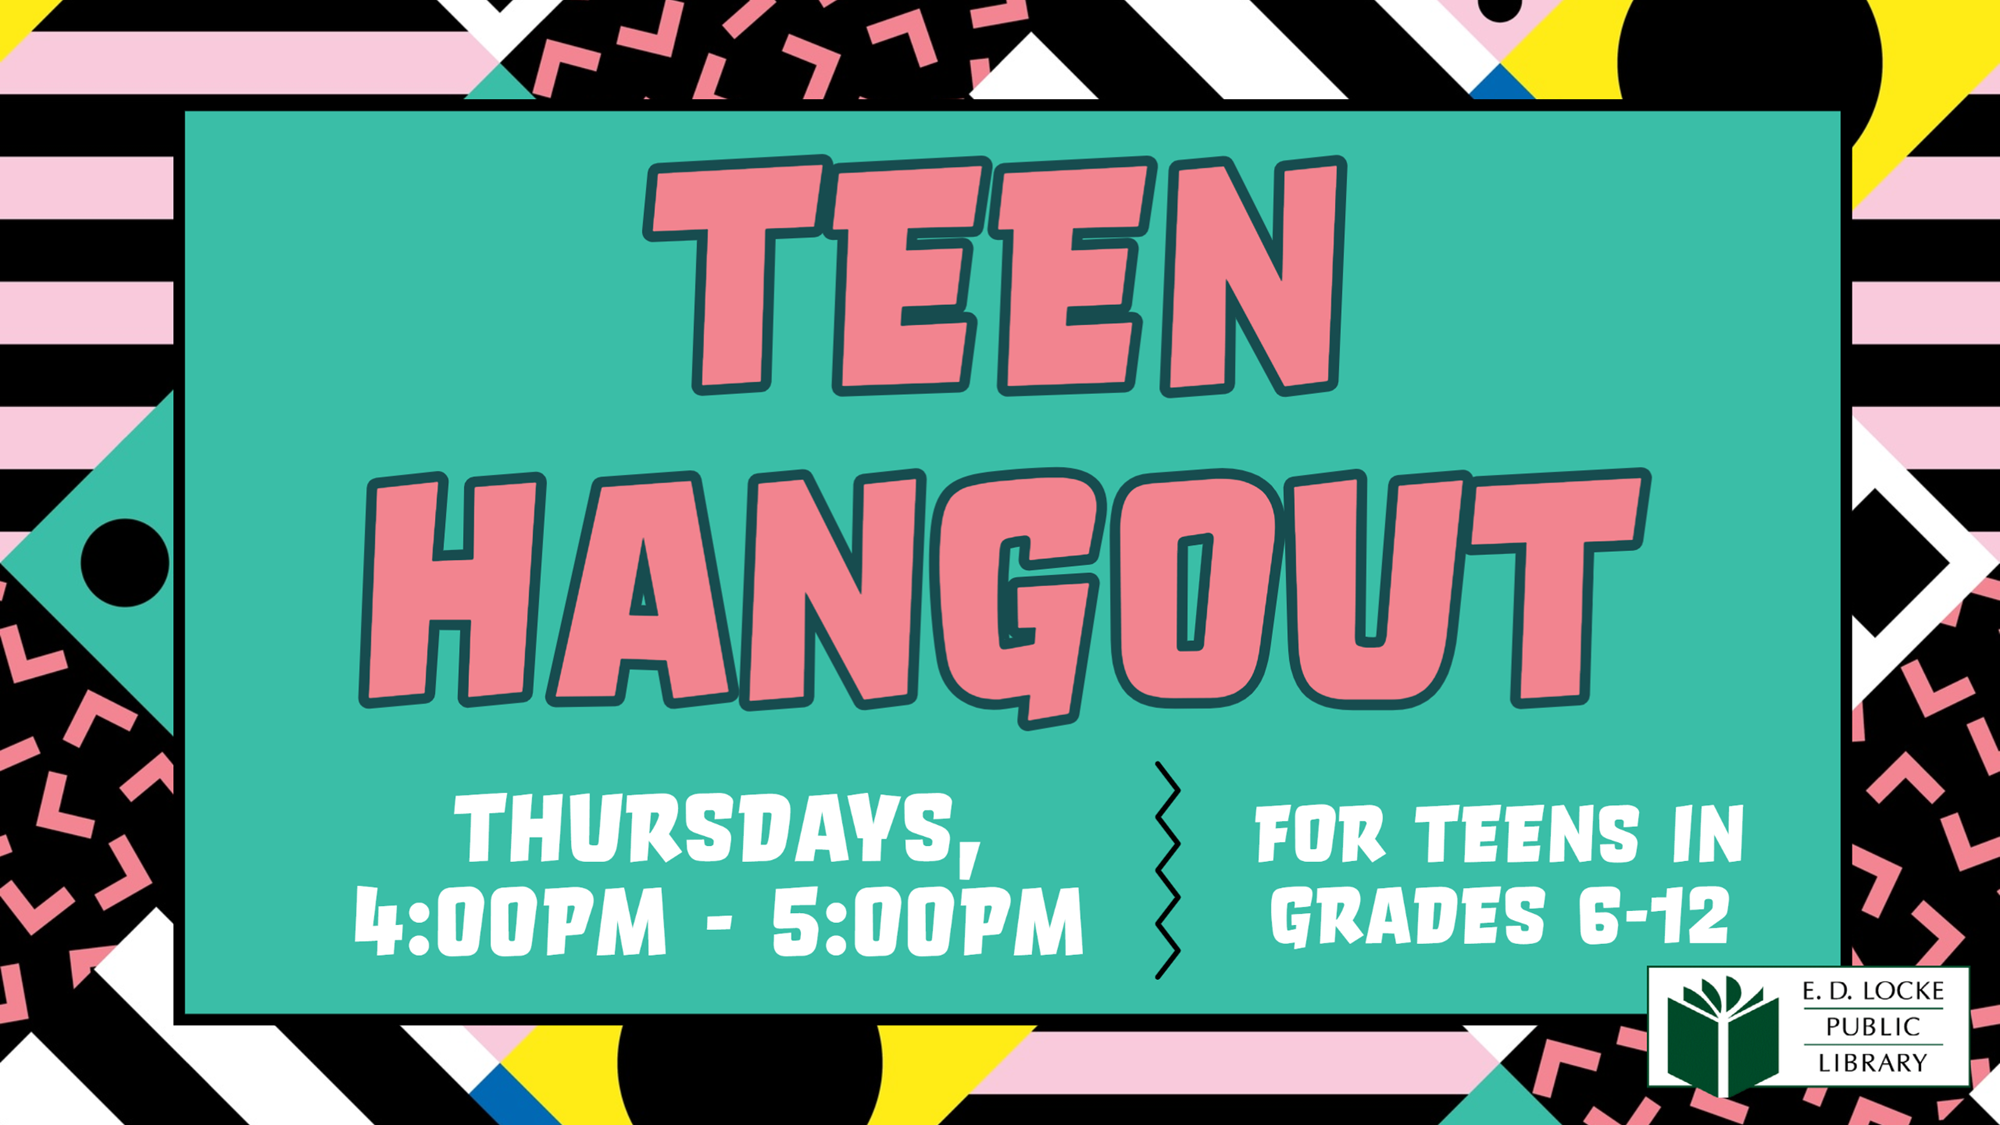 Flyer for Teen Hangout. Background is teal with a 90's type pattern with lines and squiggles. 